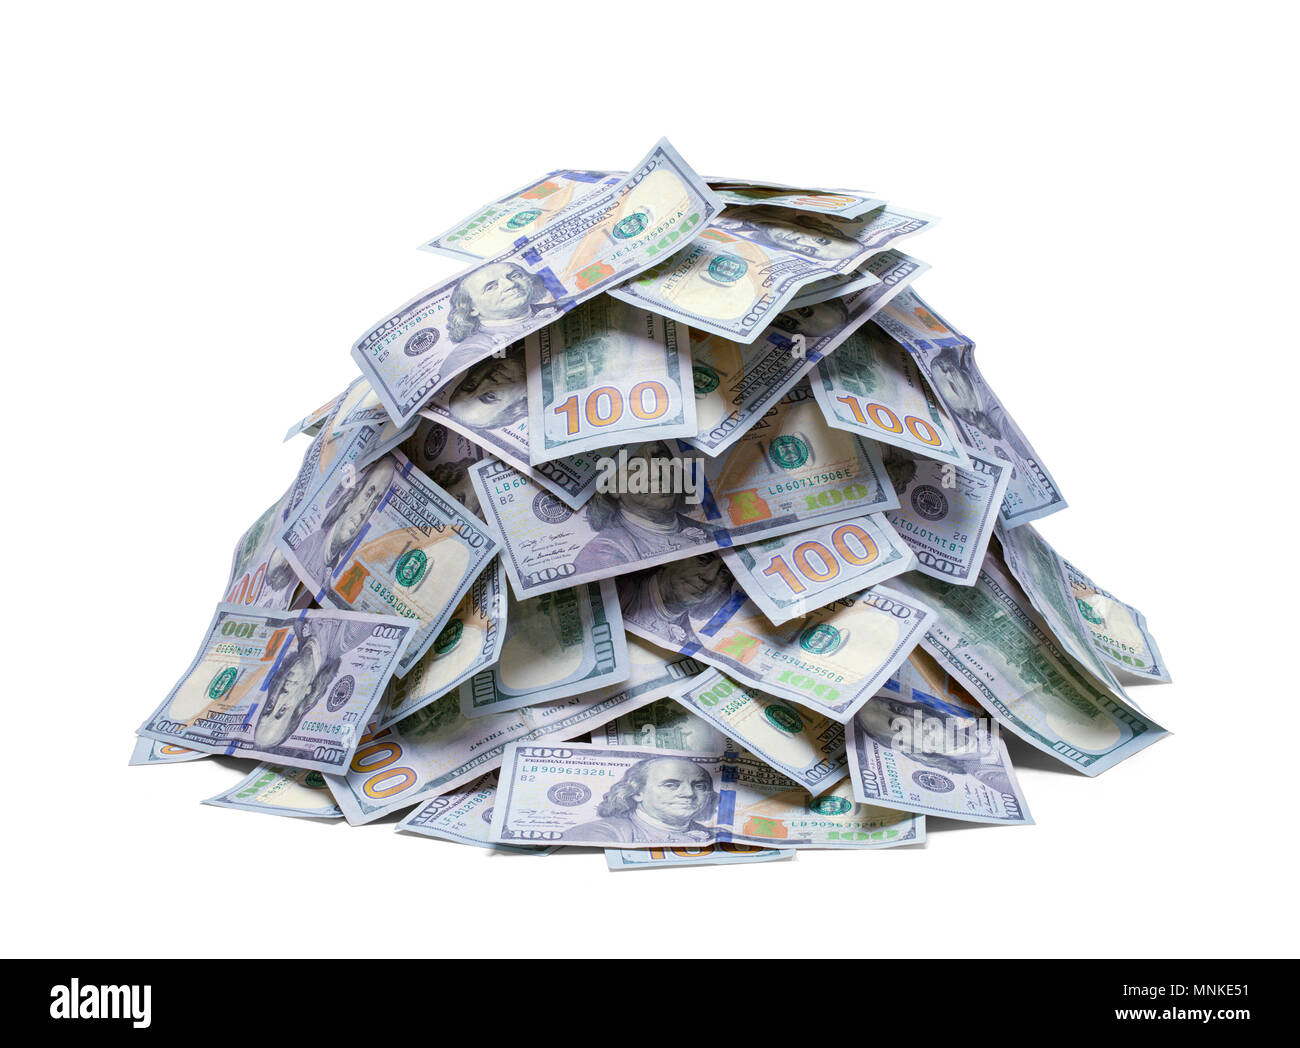 Small Pile of Hundred Dollar Bills Isolated on a White Background. Stock Photo